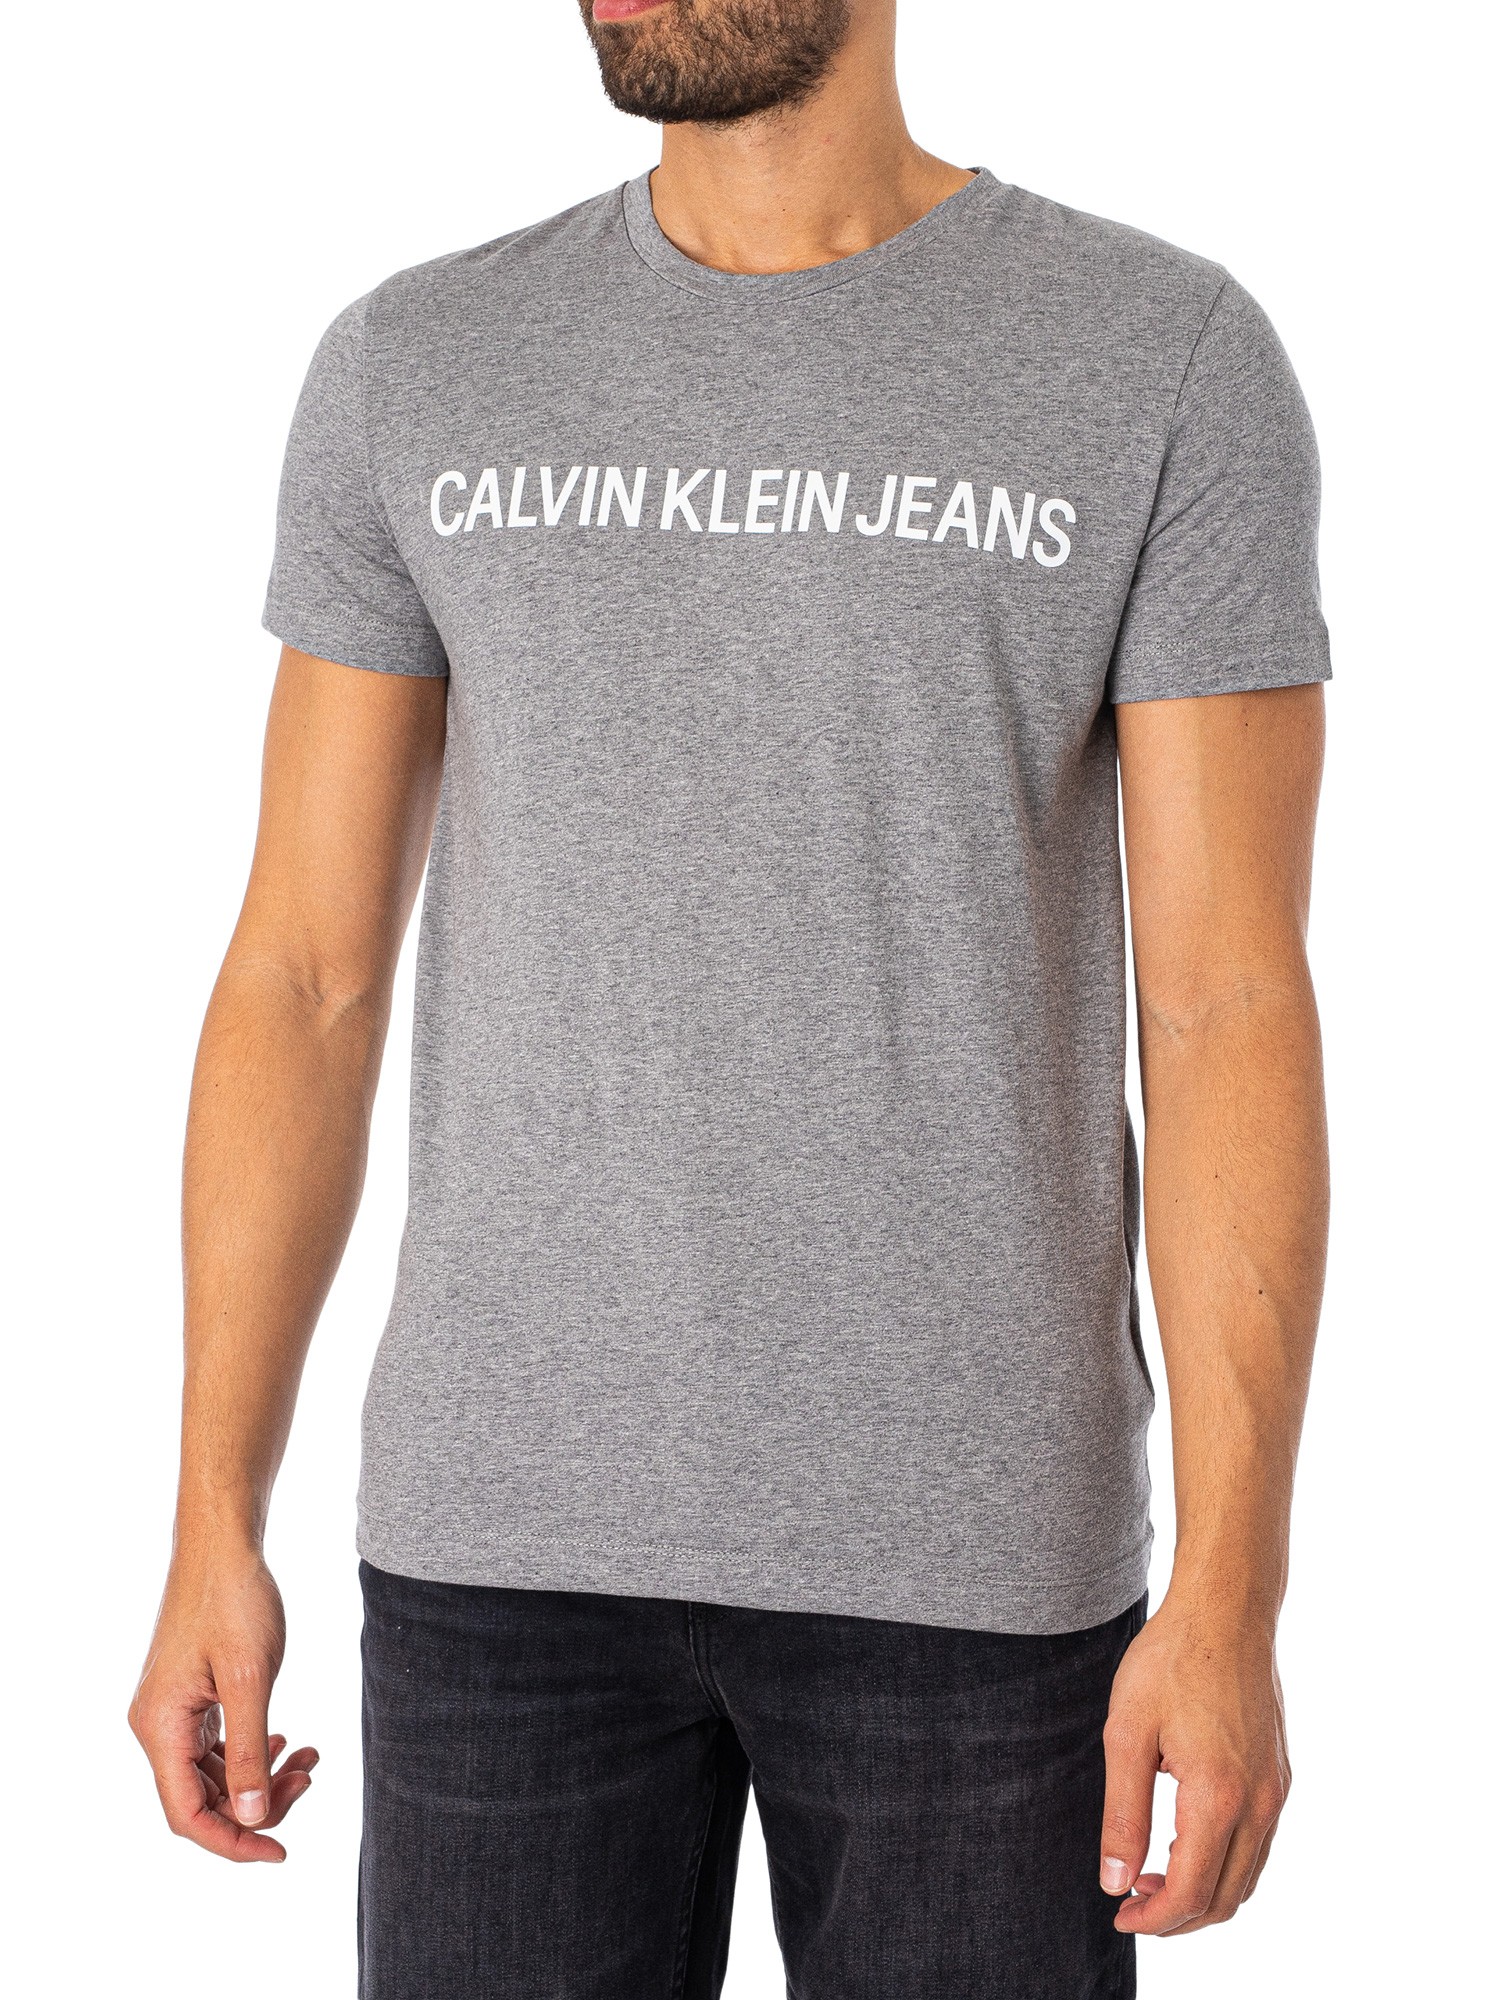 Calvin Klein Jeans Core Institutional T-Shirt - Grey Heather | Standout